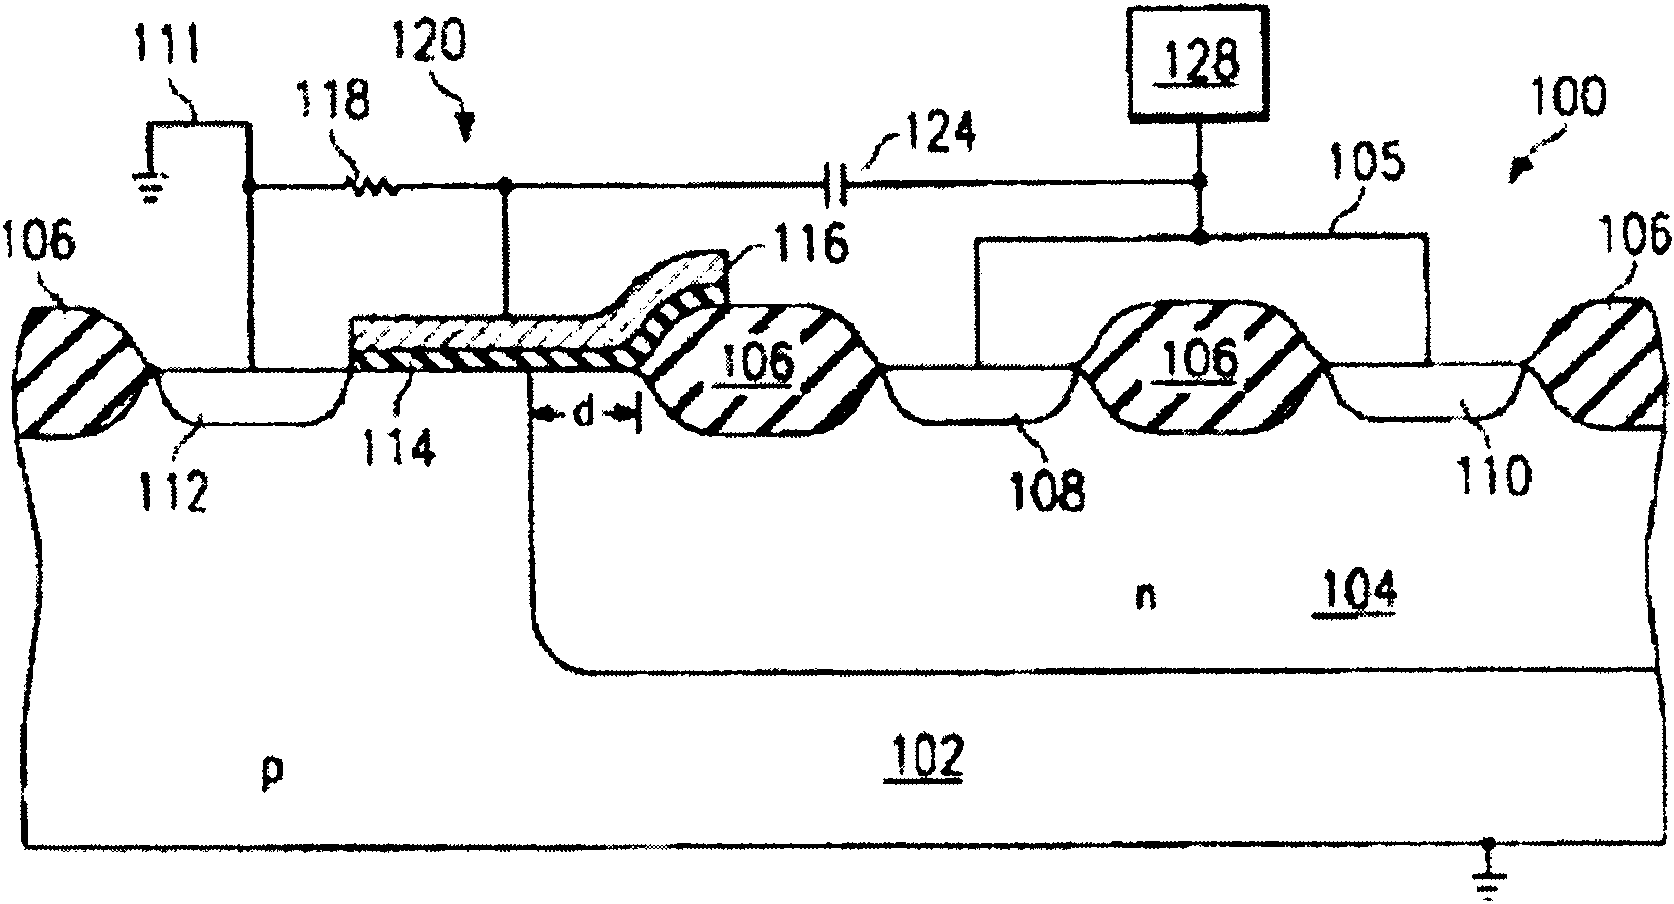 SCR (silicon controlled rectifier)-based electrostatic protection device of integrated circuit